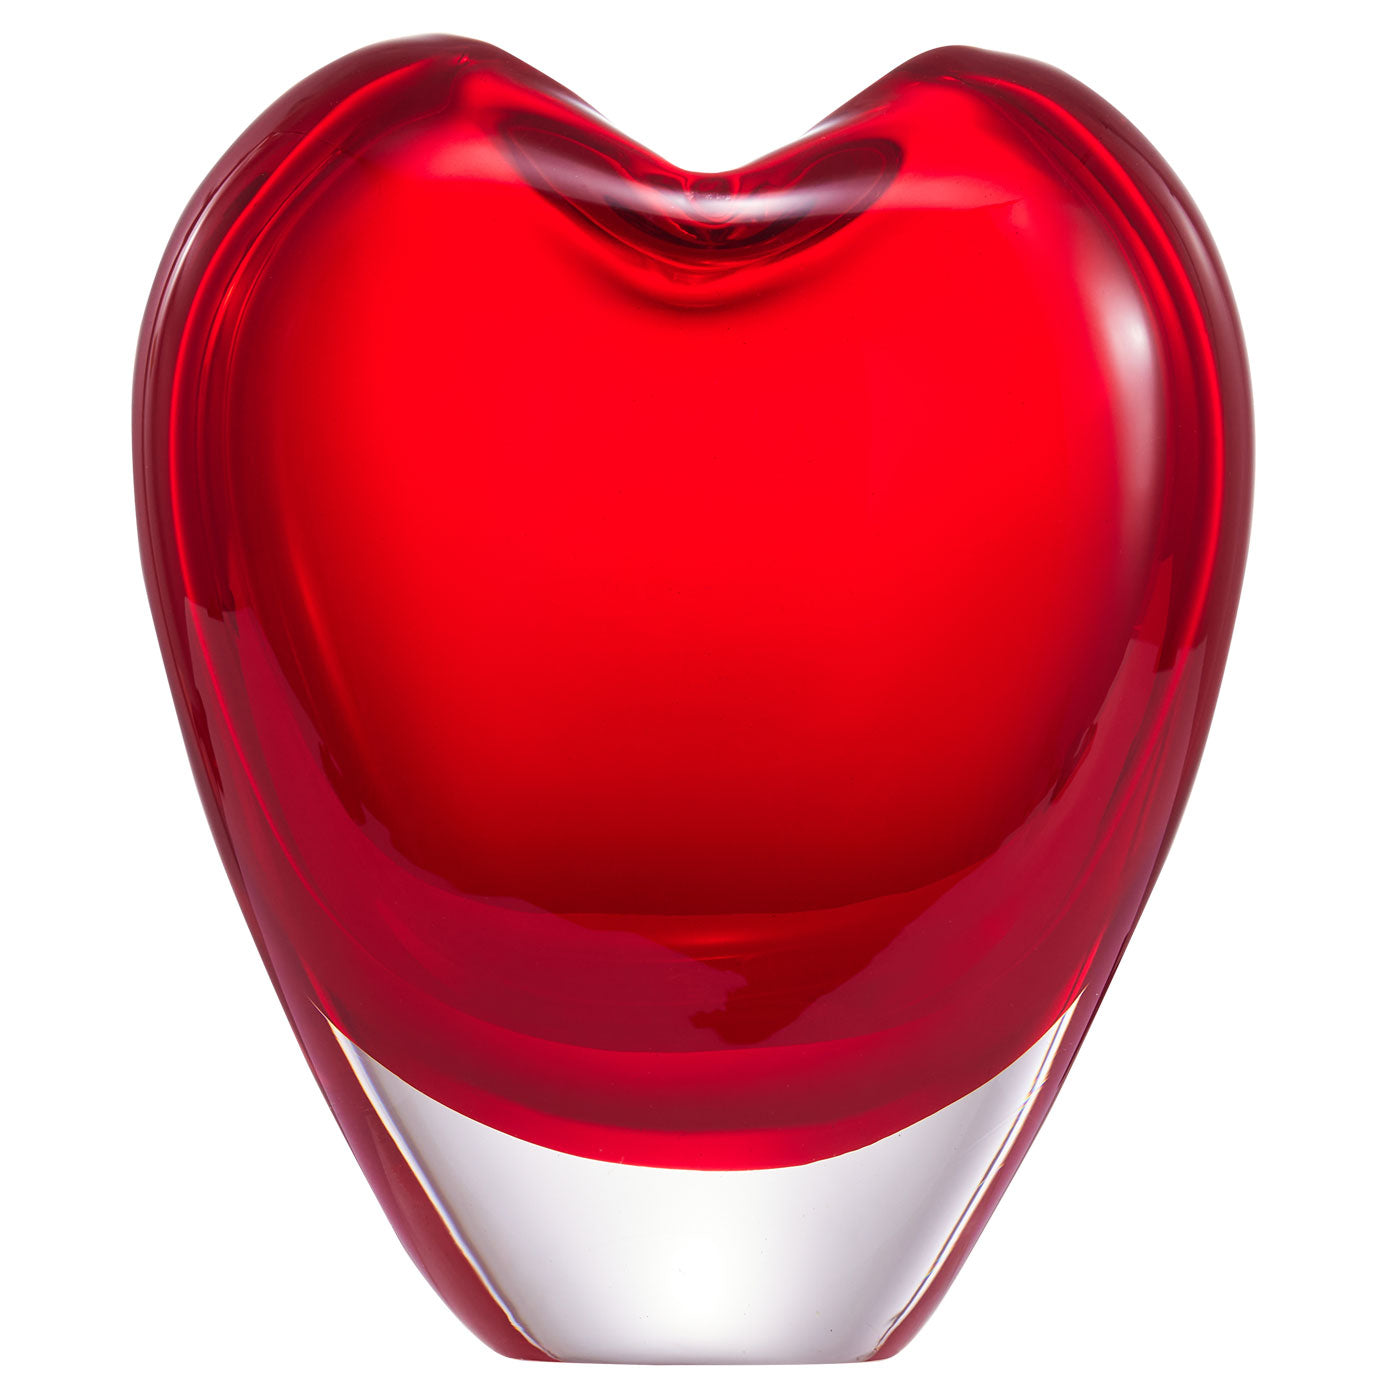 Hand Blown Red Love Heart Shaped Sommerso Art Glass Vase 7-10 inch tall